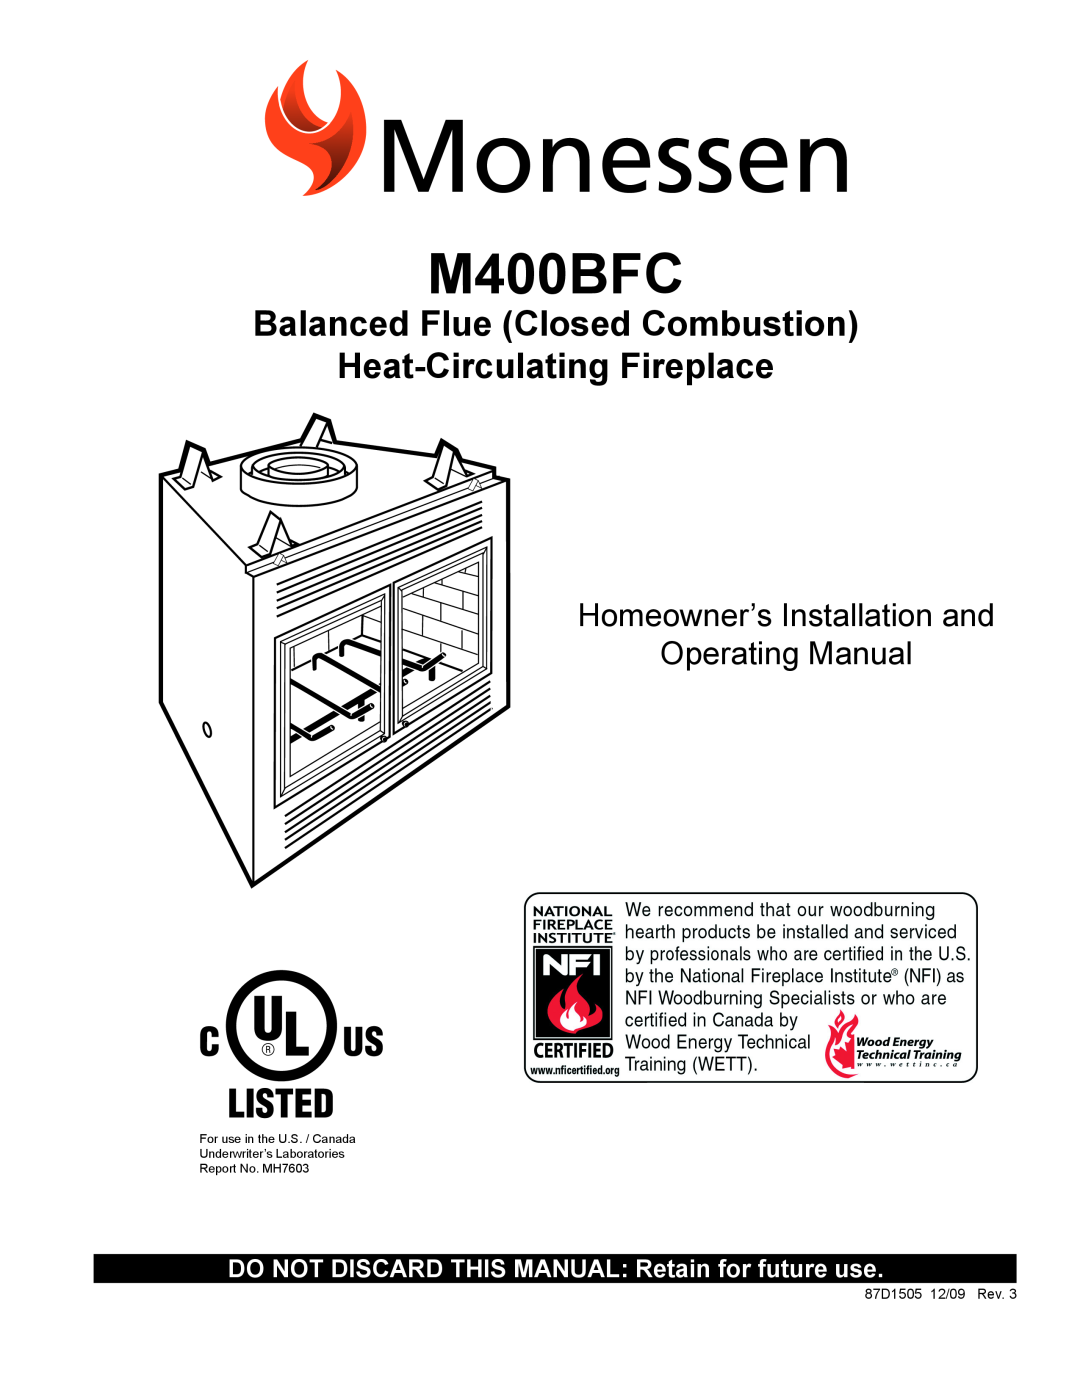 Monessen Hearth M400BFC manual Balanced Flue Closed Combustion Heat-Circulating Fireplace, Report No. MH7603 